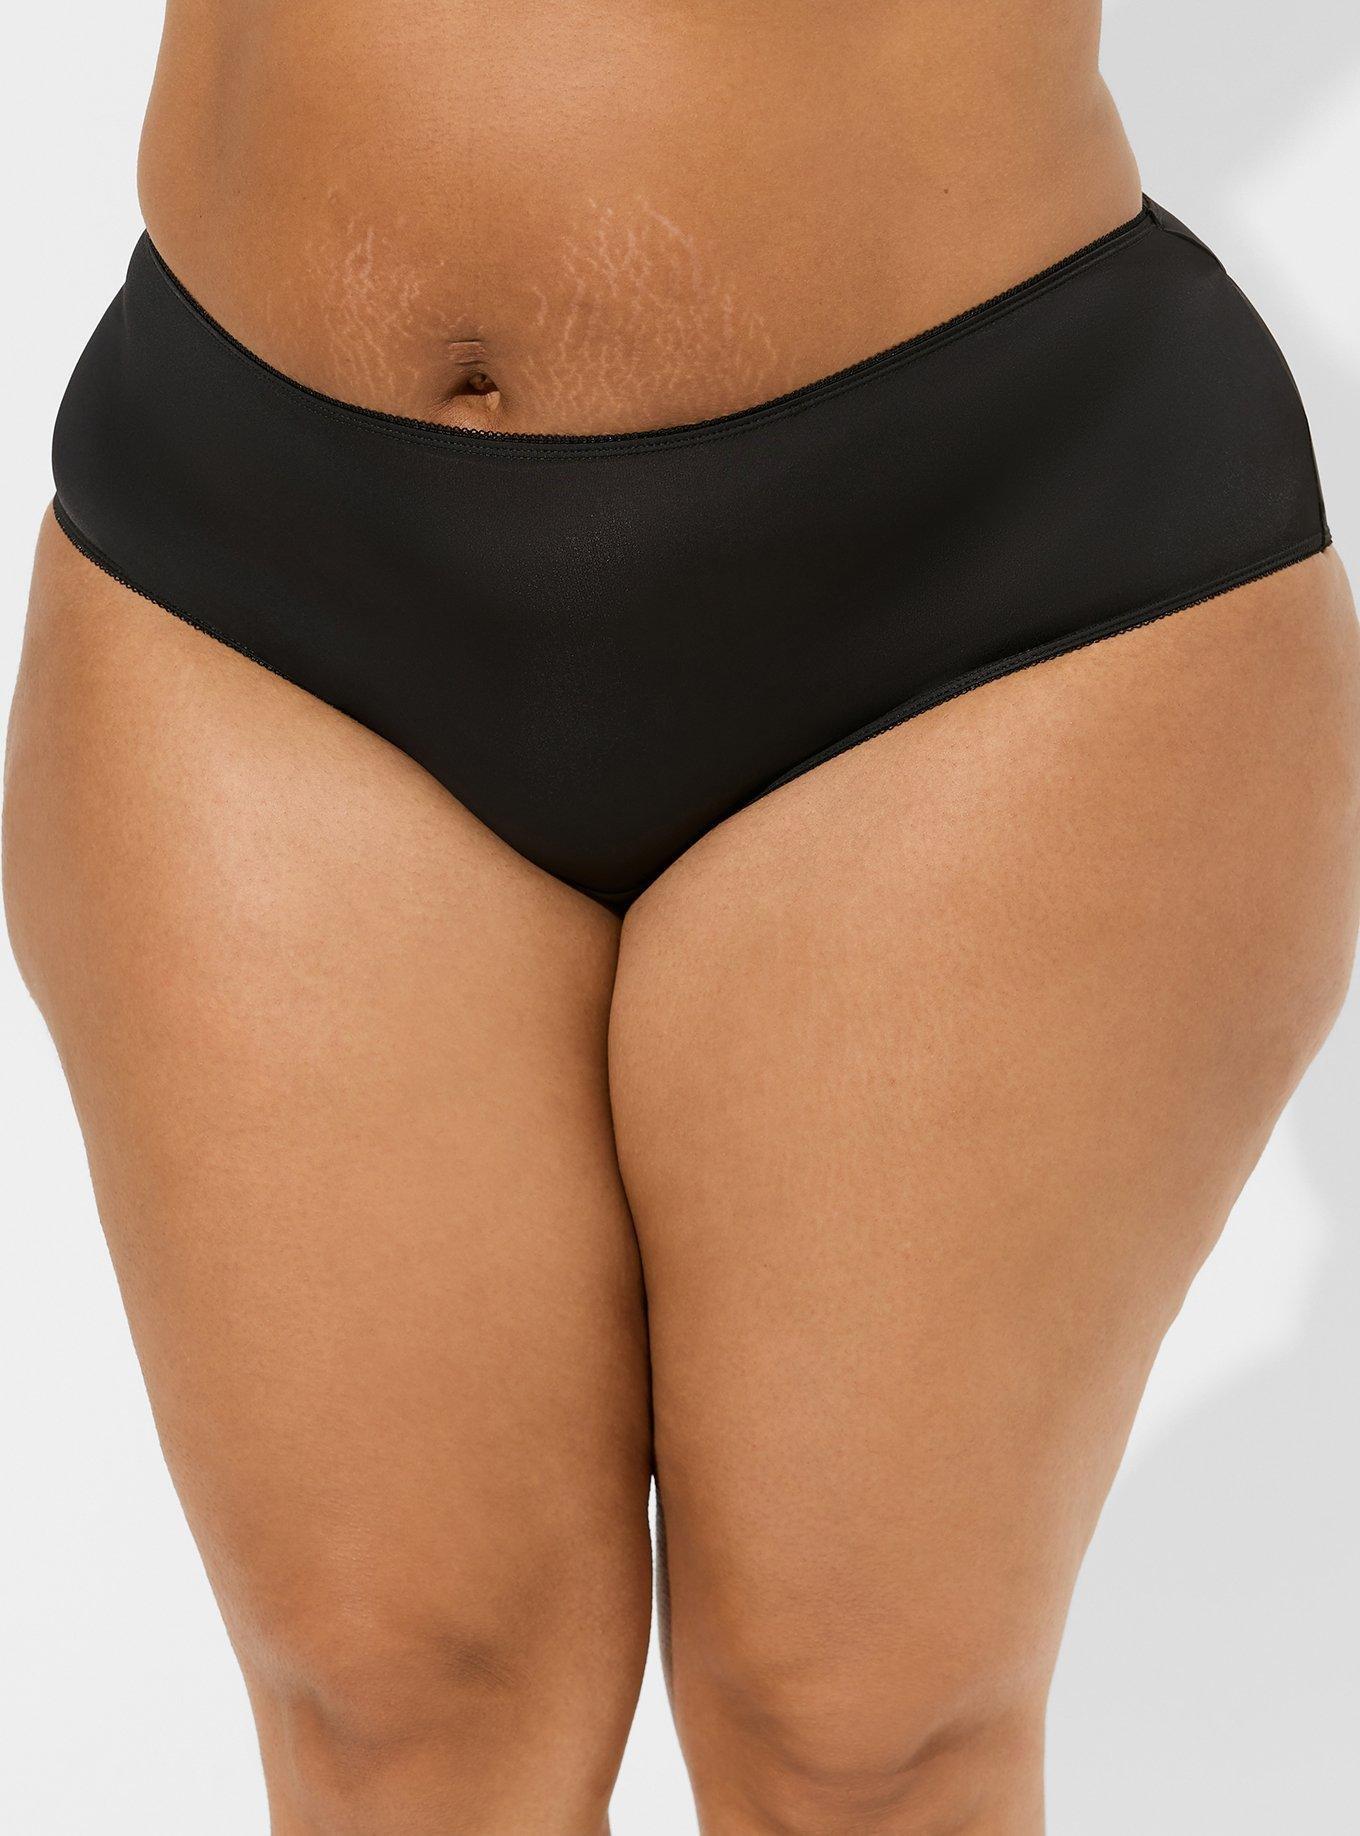 Plus Size - Microfiber Cheeky Panty With Cross Back - Torrid